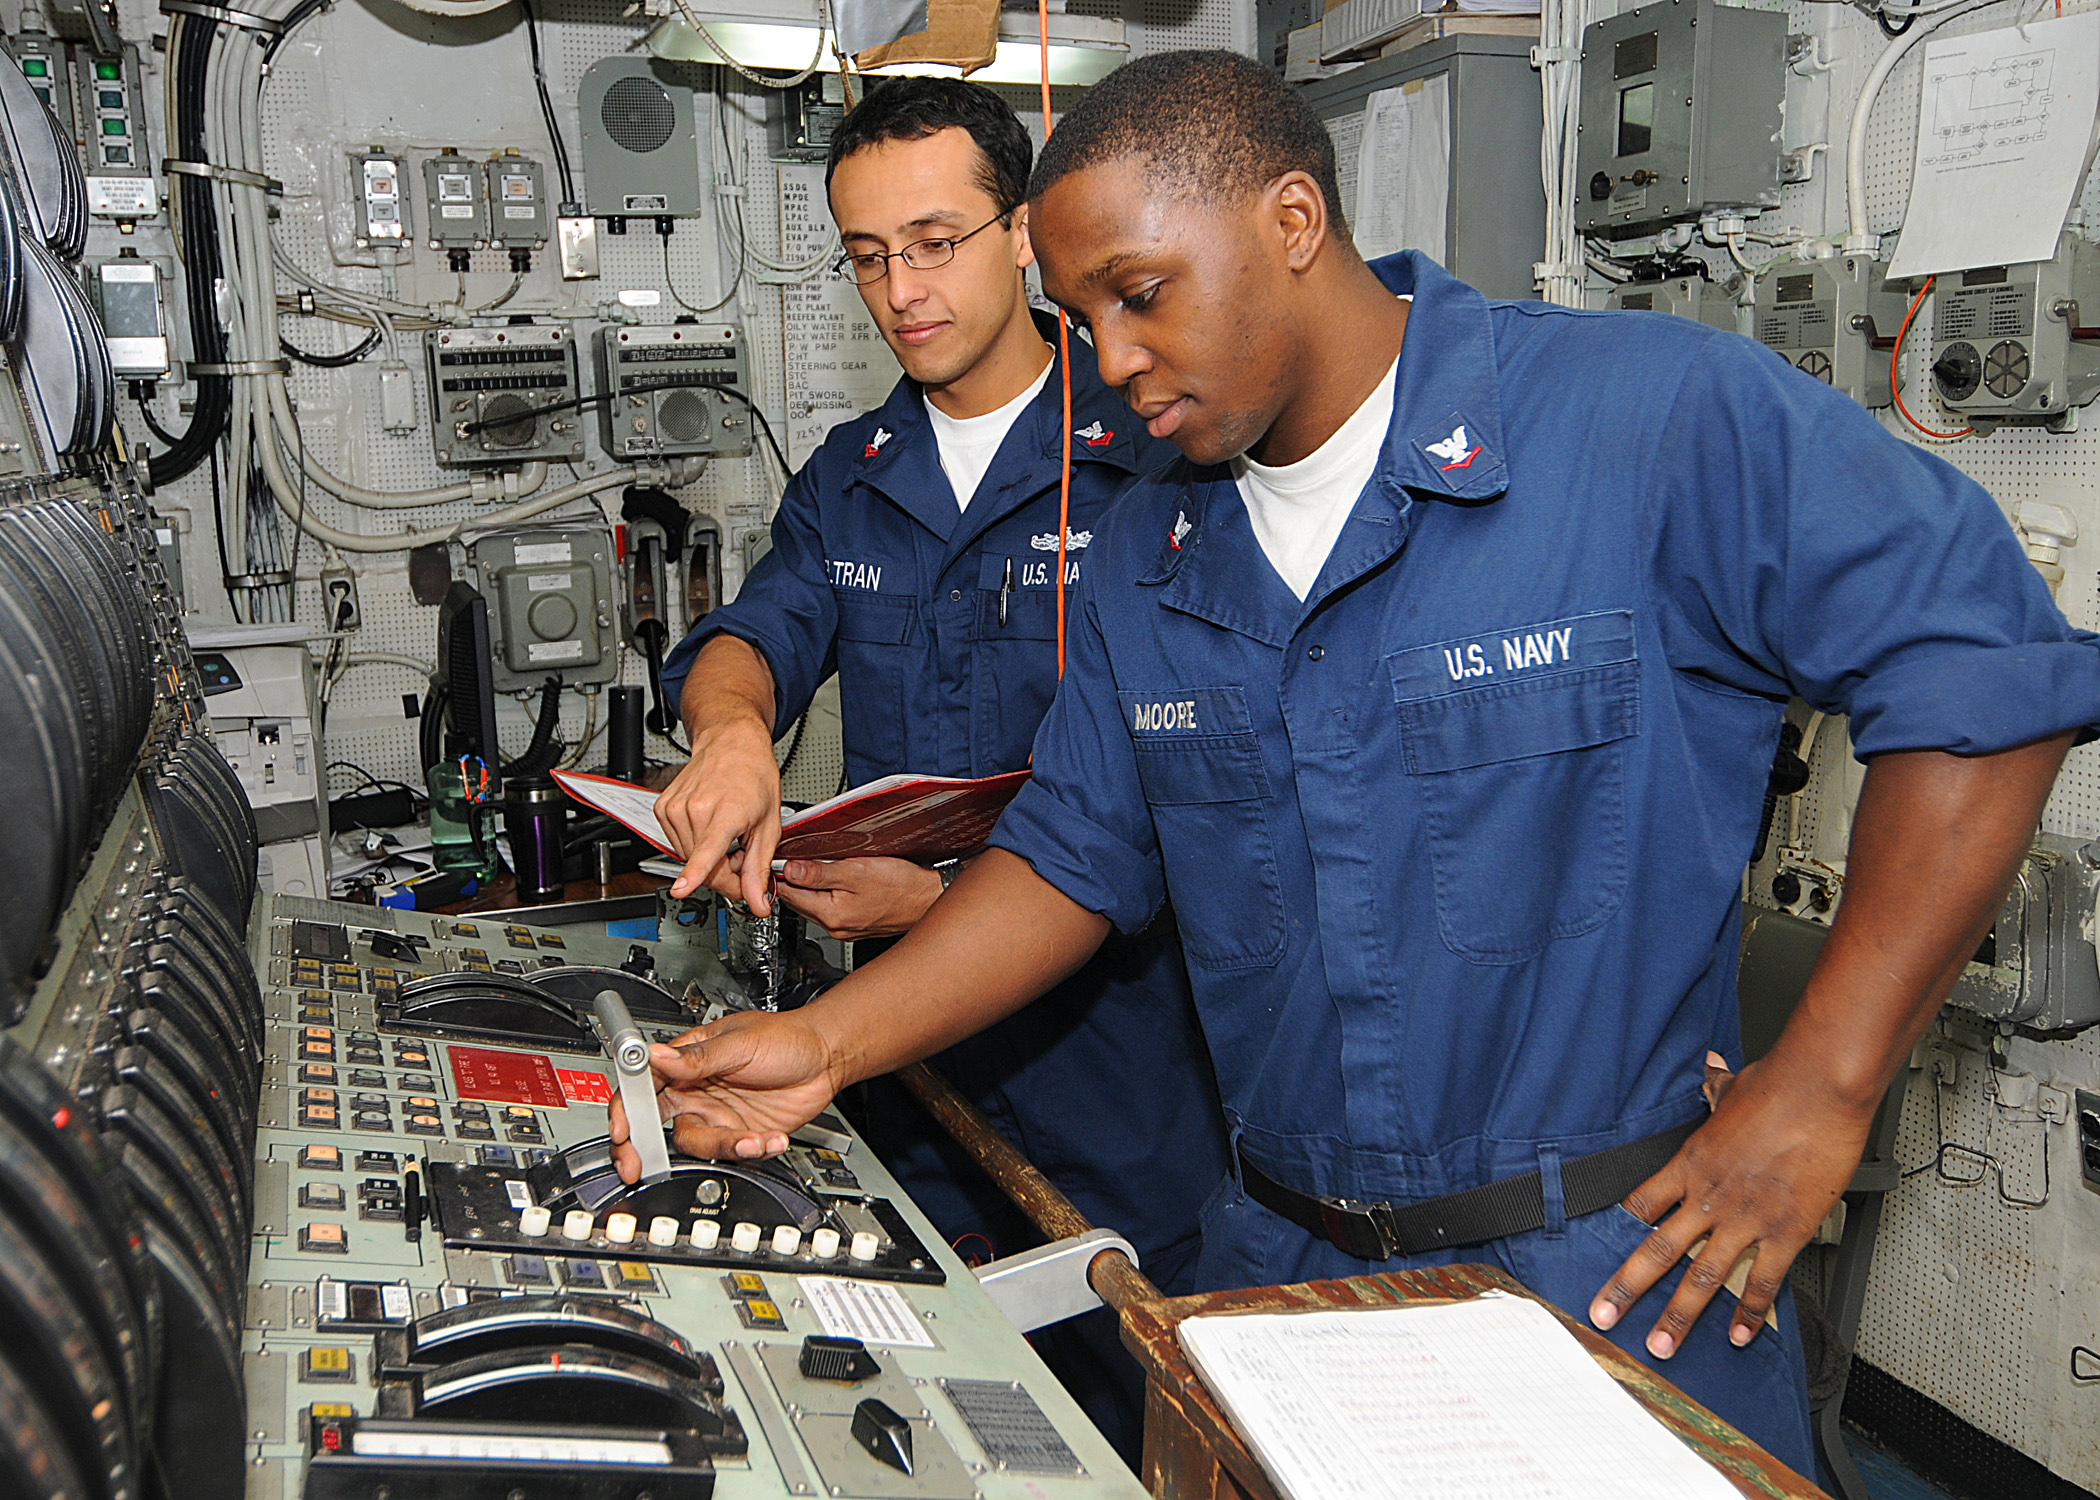 Defense.gov News Photo 100503-N-1082Z-022 - U.S. Navy Petty Officer 2nd Class Alberto Beltran-Lopez provides training on the main propulsion console to Petty Officer 3rd Class Marcus J. Moore